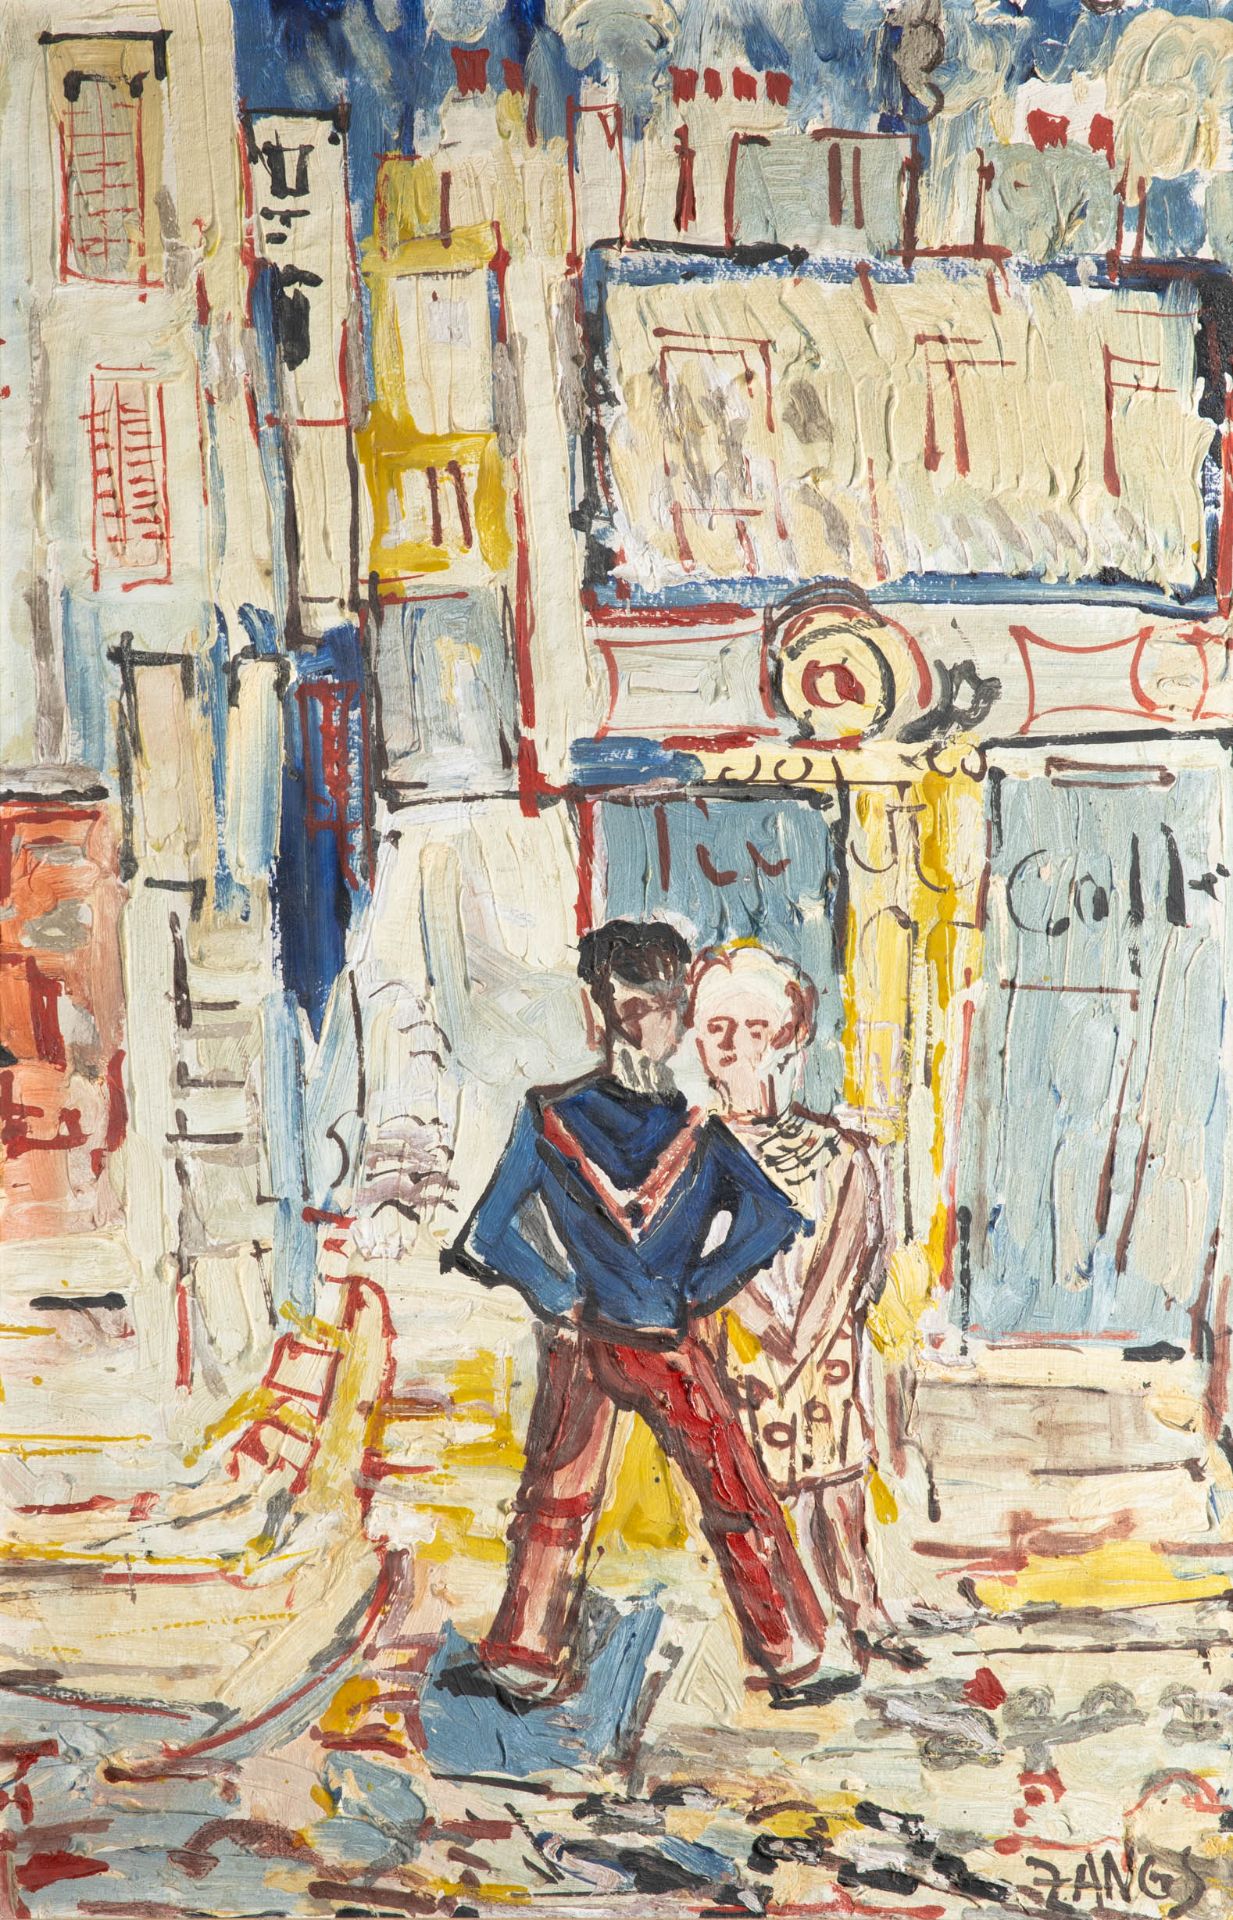 Herbert Zangs*, oil/mixed media on wood. City view with 2 people in front of a cafe, France